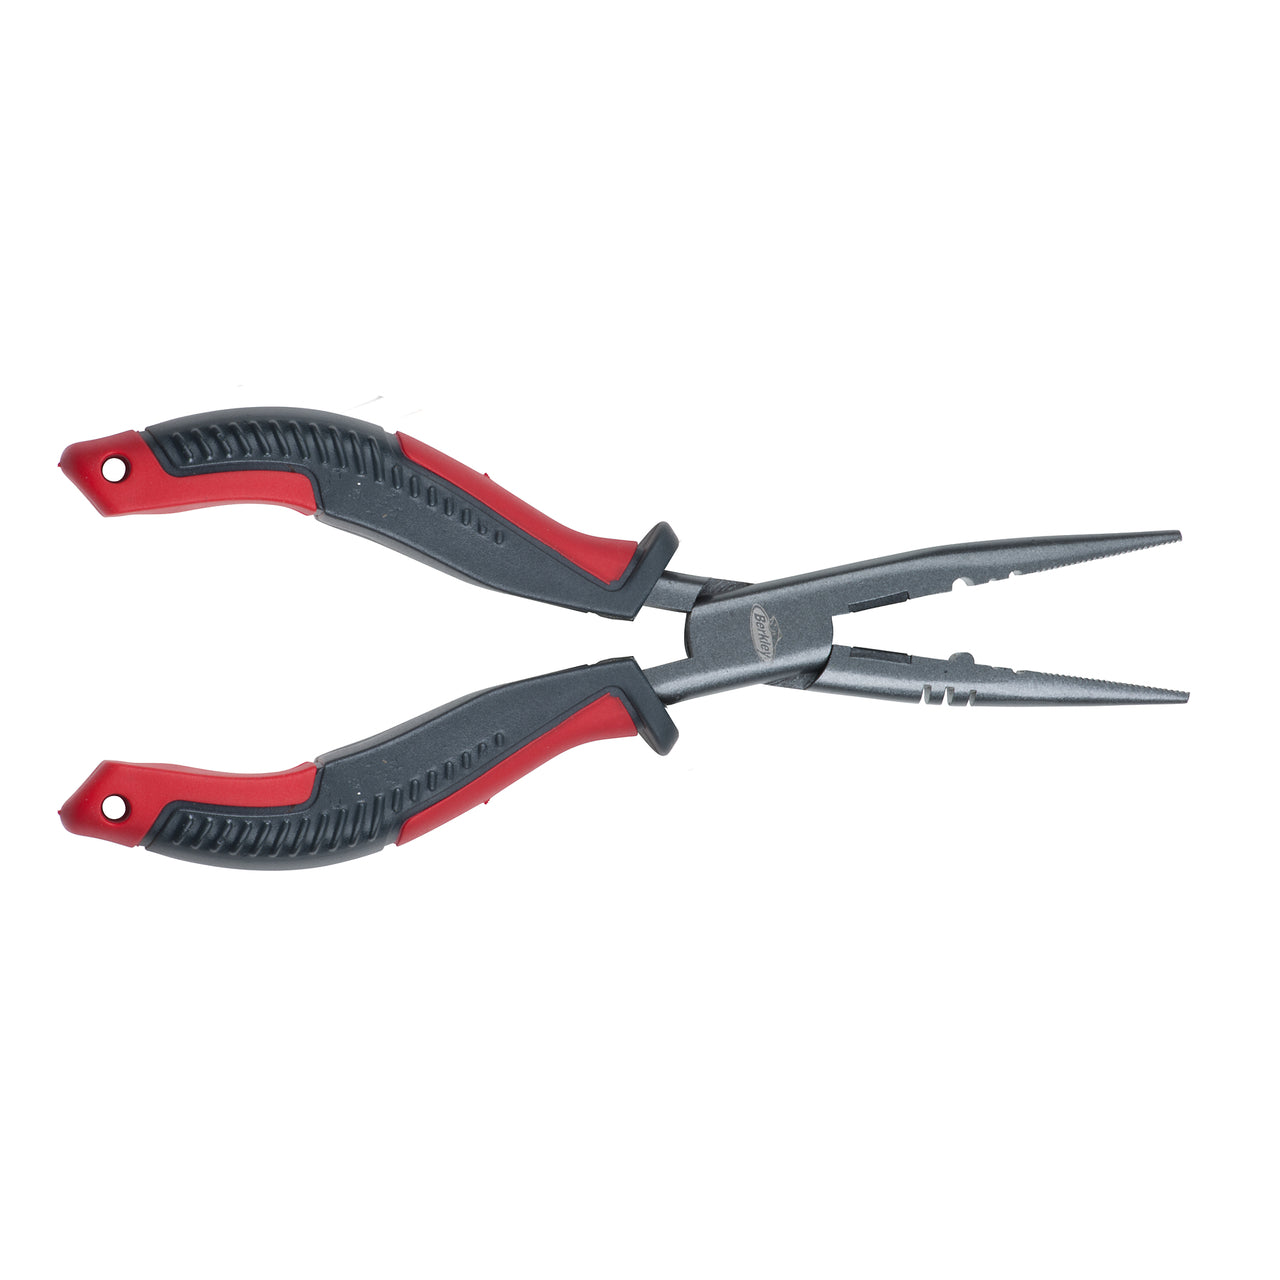 Buy KINETIC SS MAGNET PLIER at Kinetic Fishing